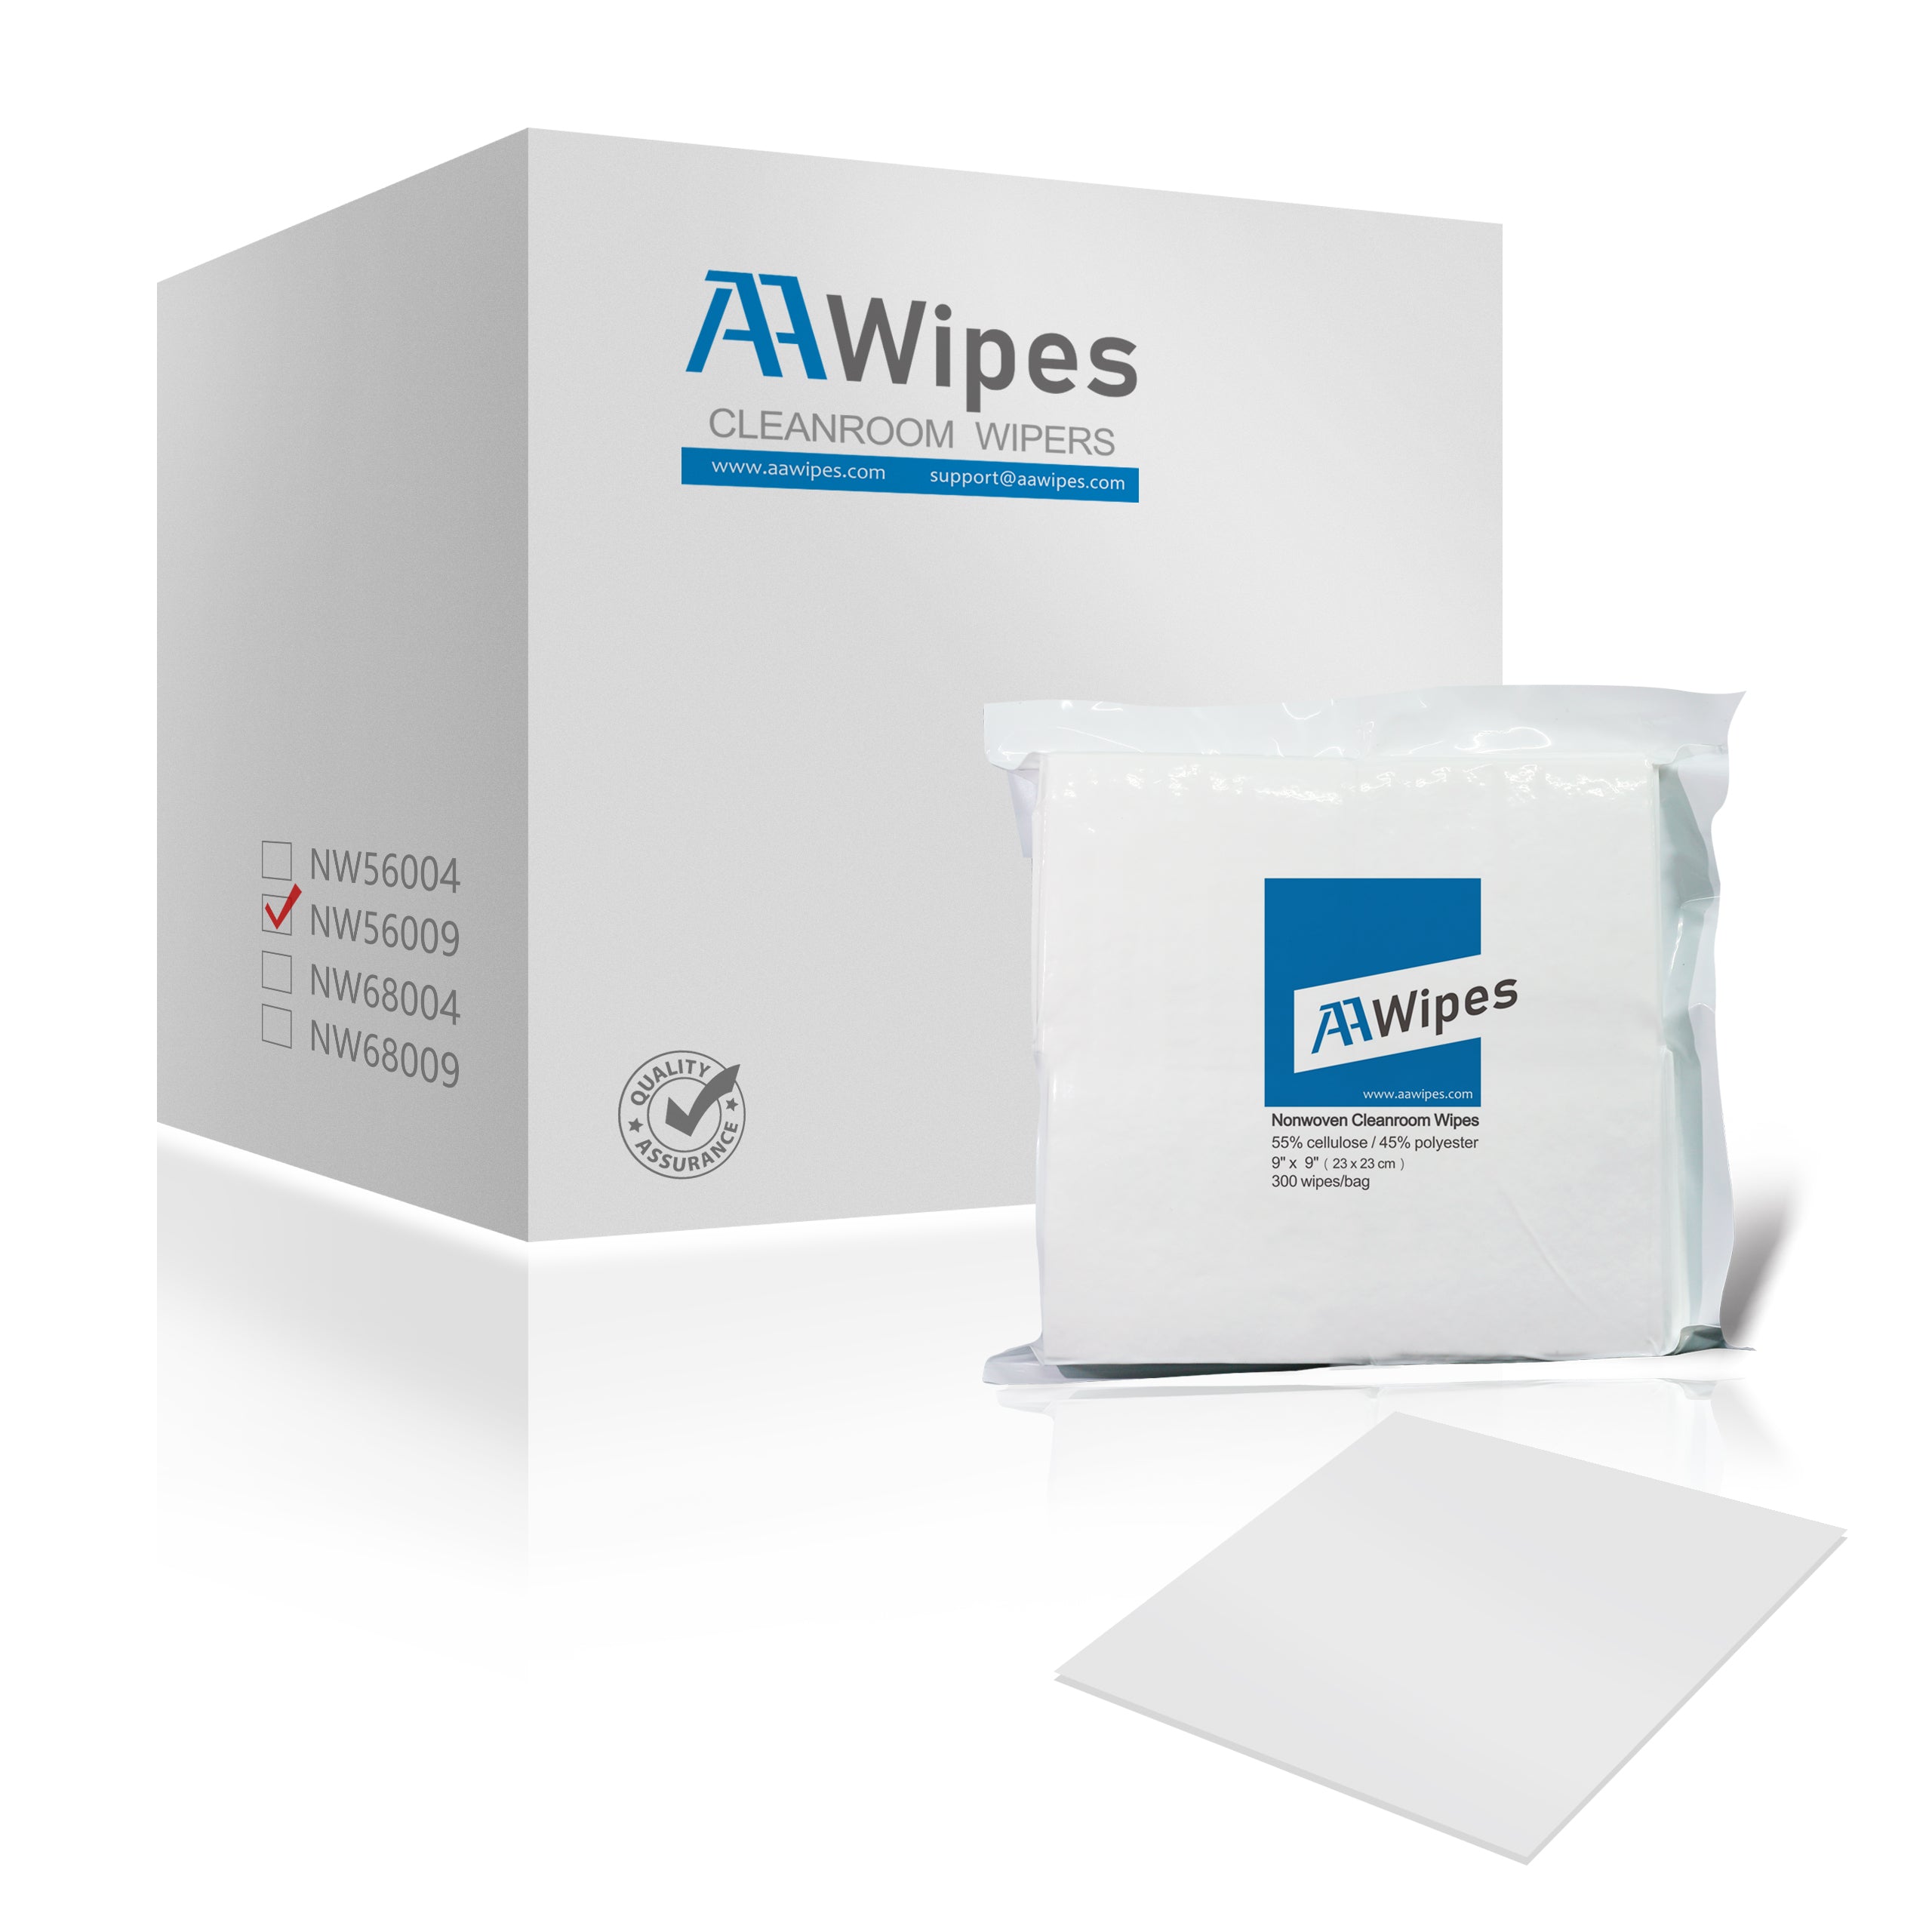 Cleanroom Wipes Cellulose/Polyester for Food and Beverage Processing, Medical Device Wipers for Contamination Control  9" x 9" (30,000 Wipes/100 Bags/Case) (56 gsm) (No. NW05609)